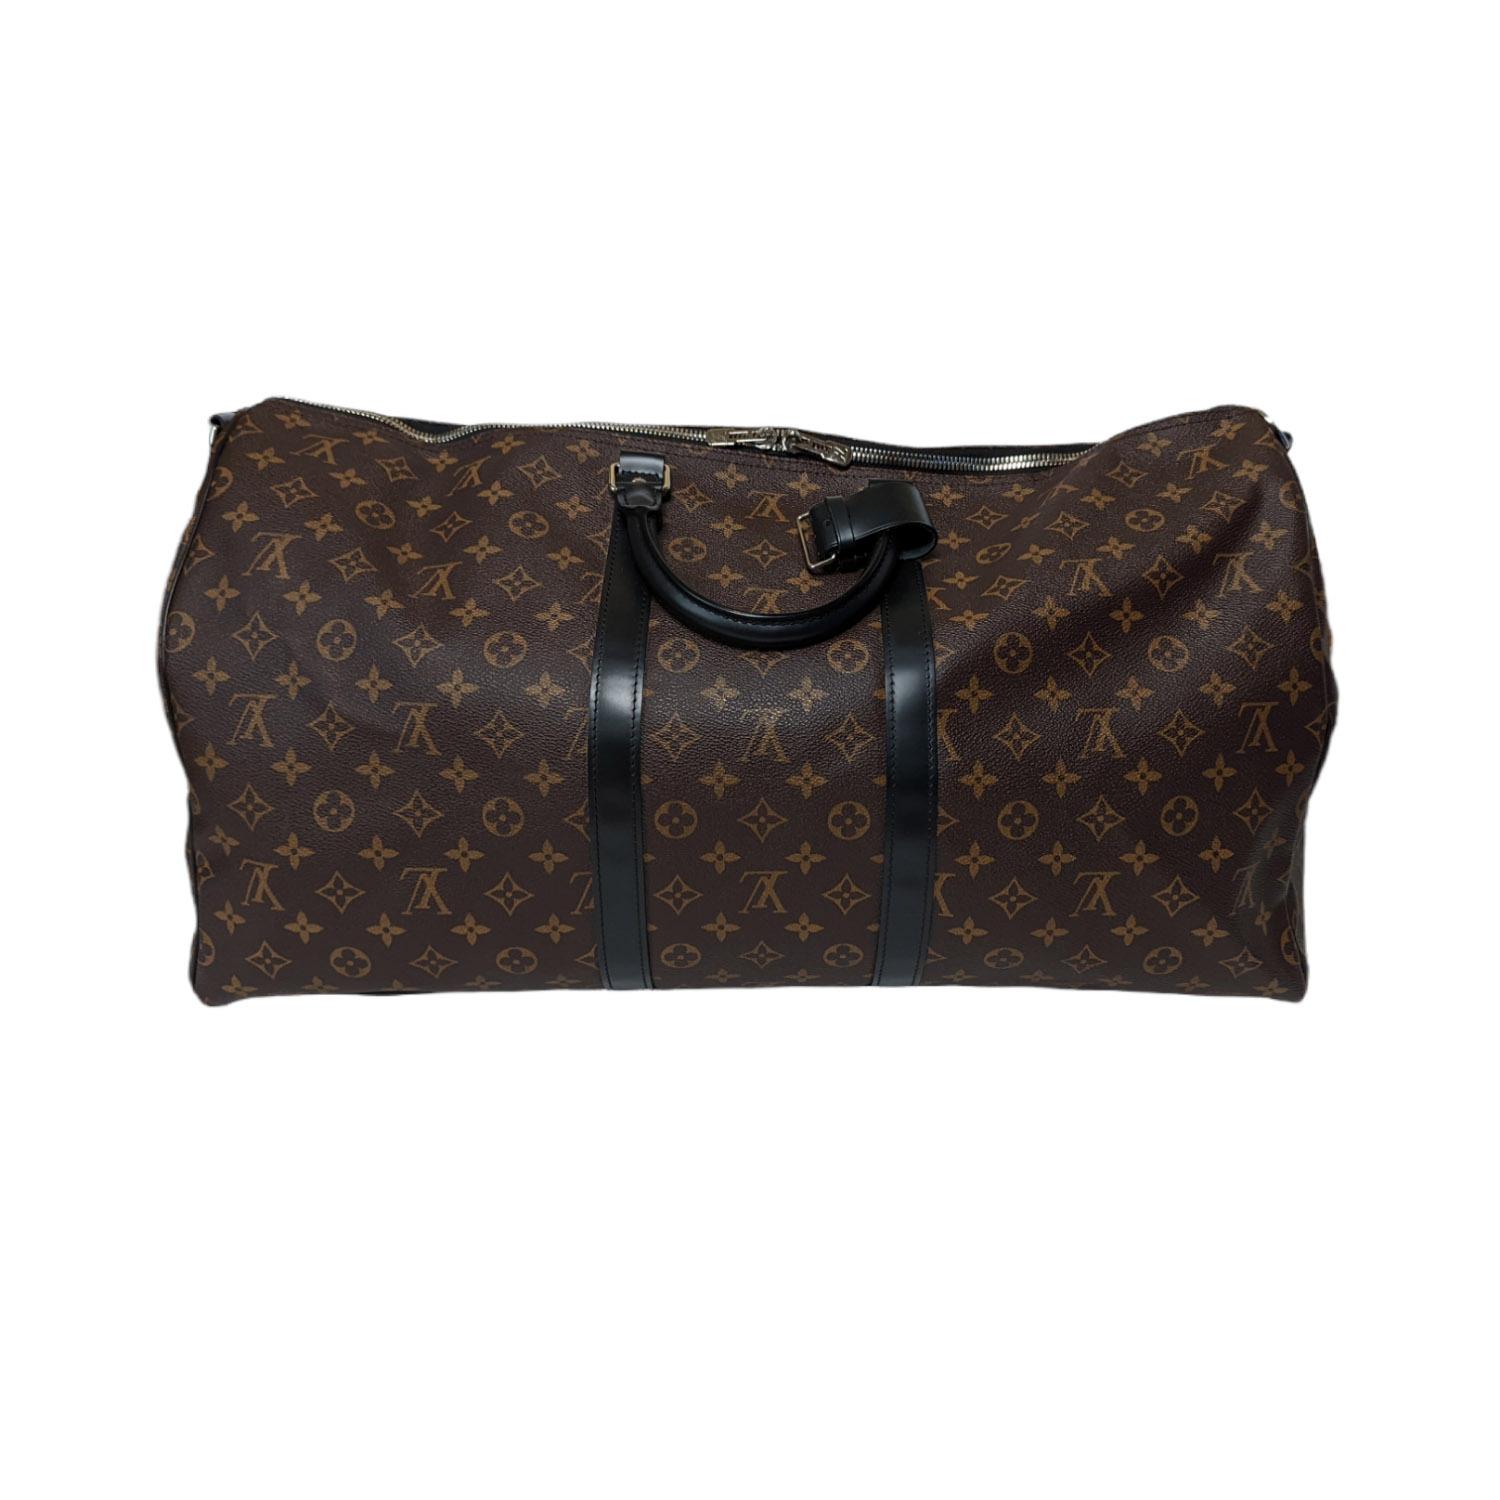 Spacious and flexible. Durable and dependable. Stylish and sophisticated. With its secure double zip and padlock, this is the perfect bag for business or pleasure. Retail $2,570.

Designer: Louis Vuitton
Material: Monogram Macassar coated-canvas and